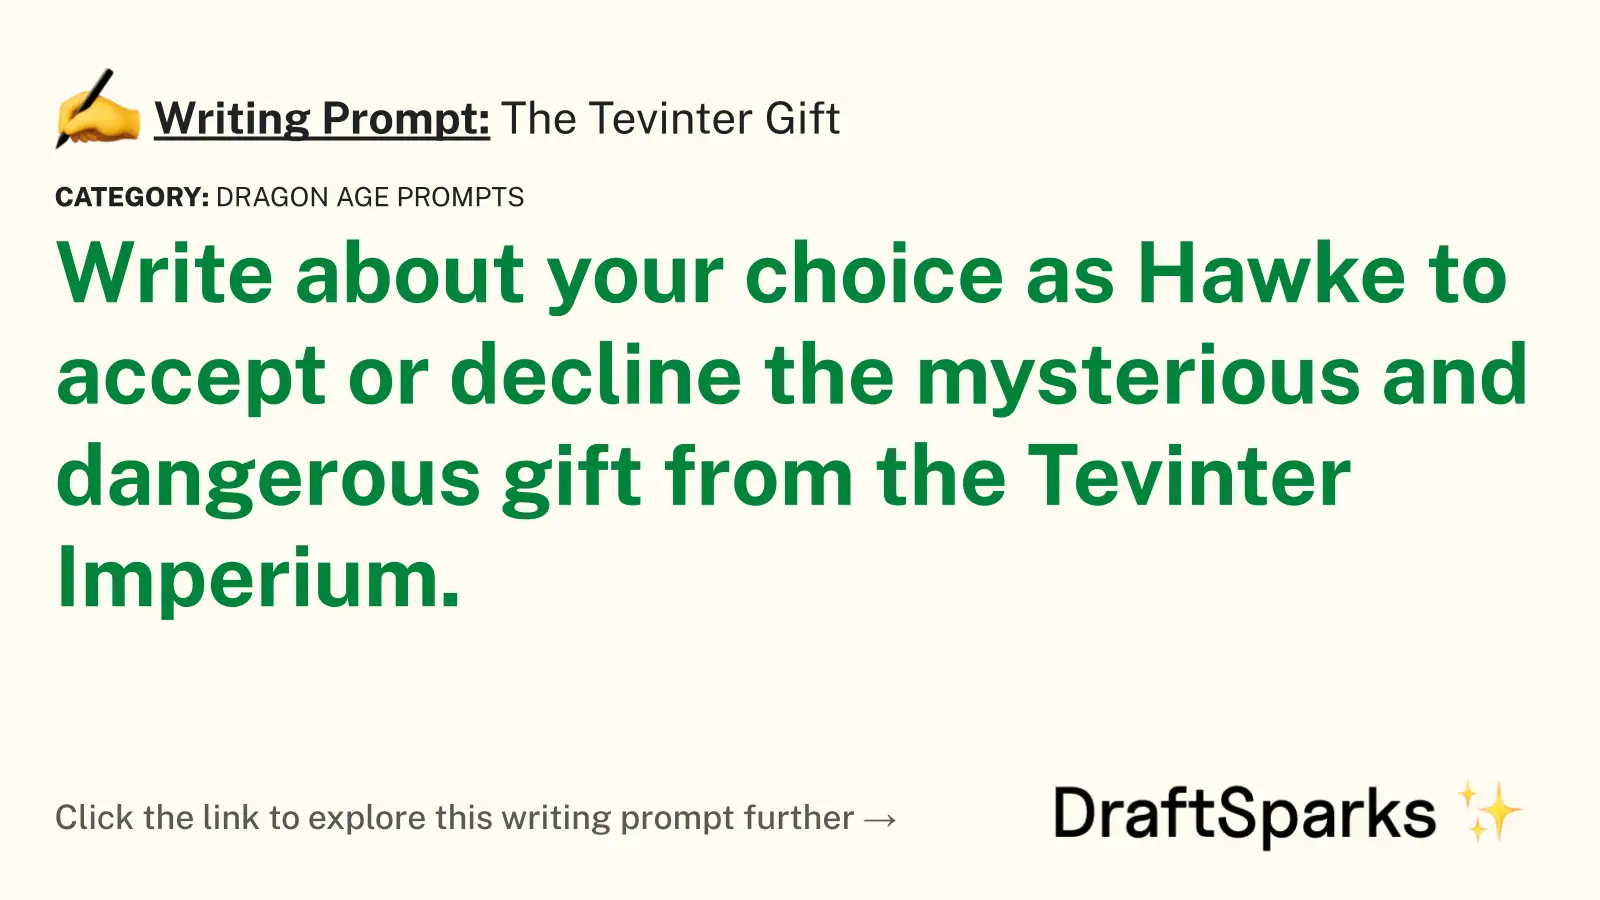 The Tevinter Gift